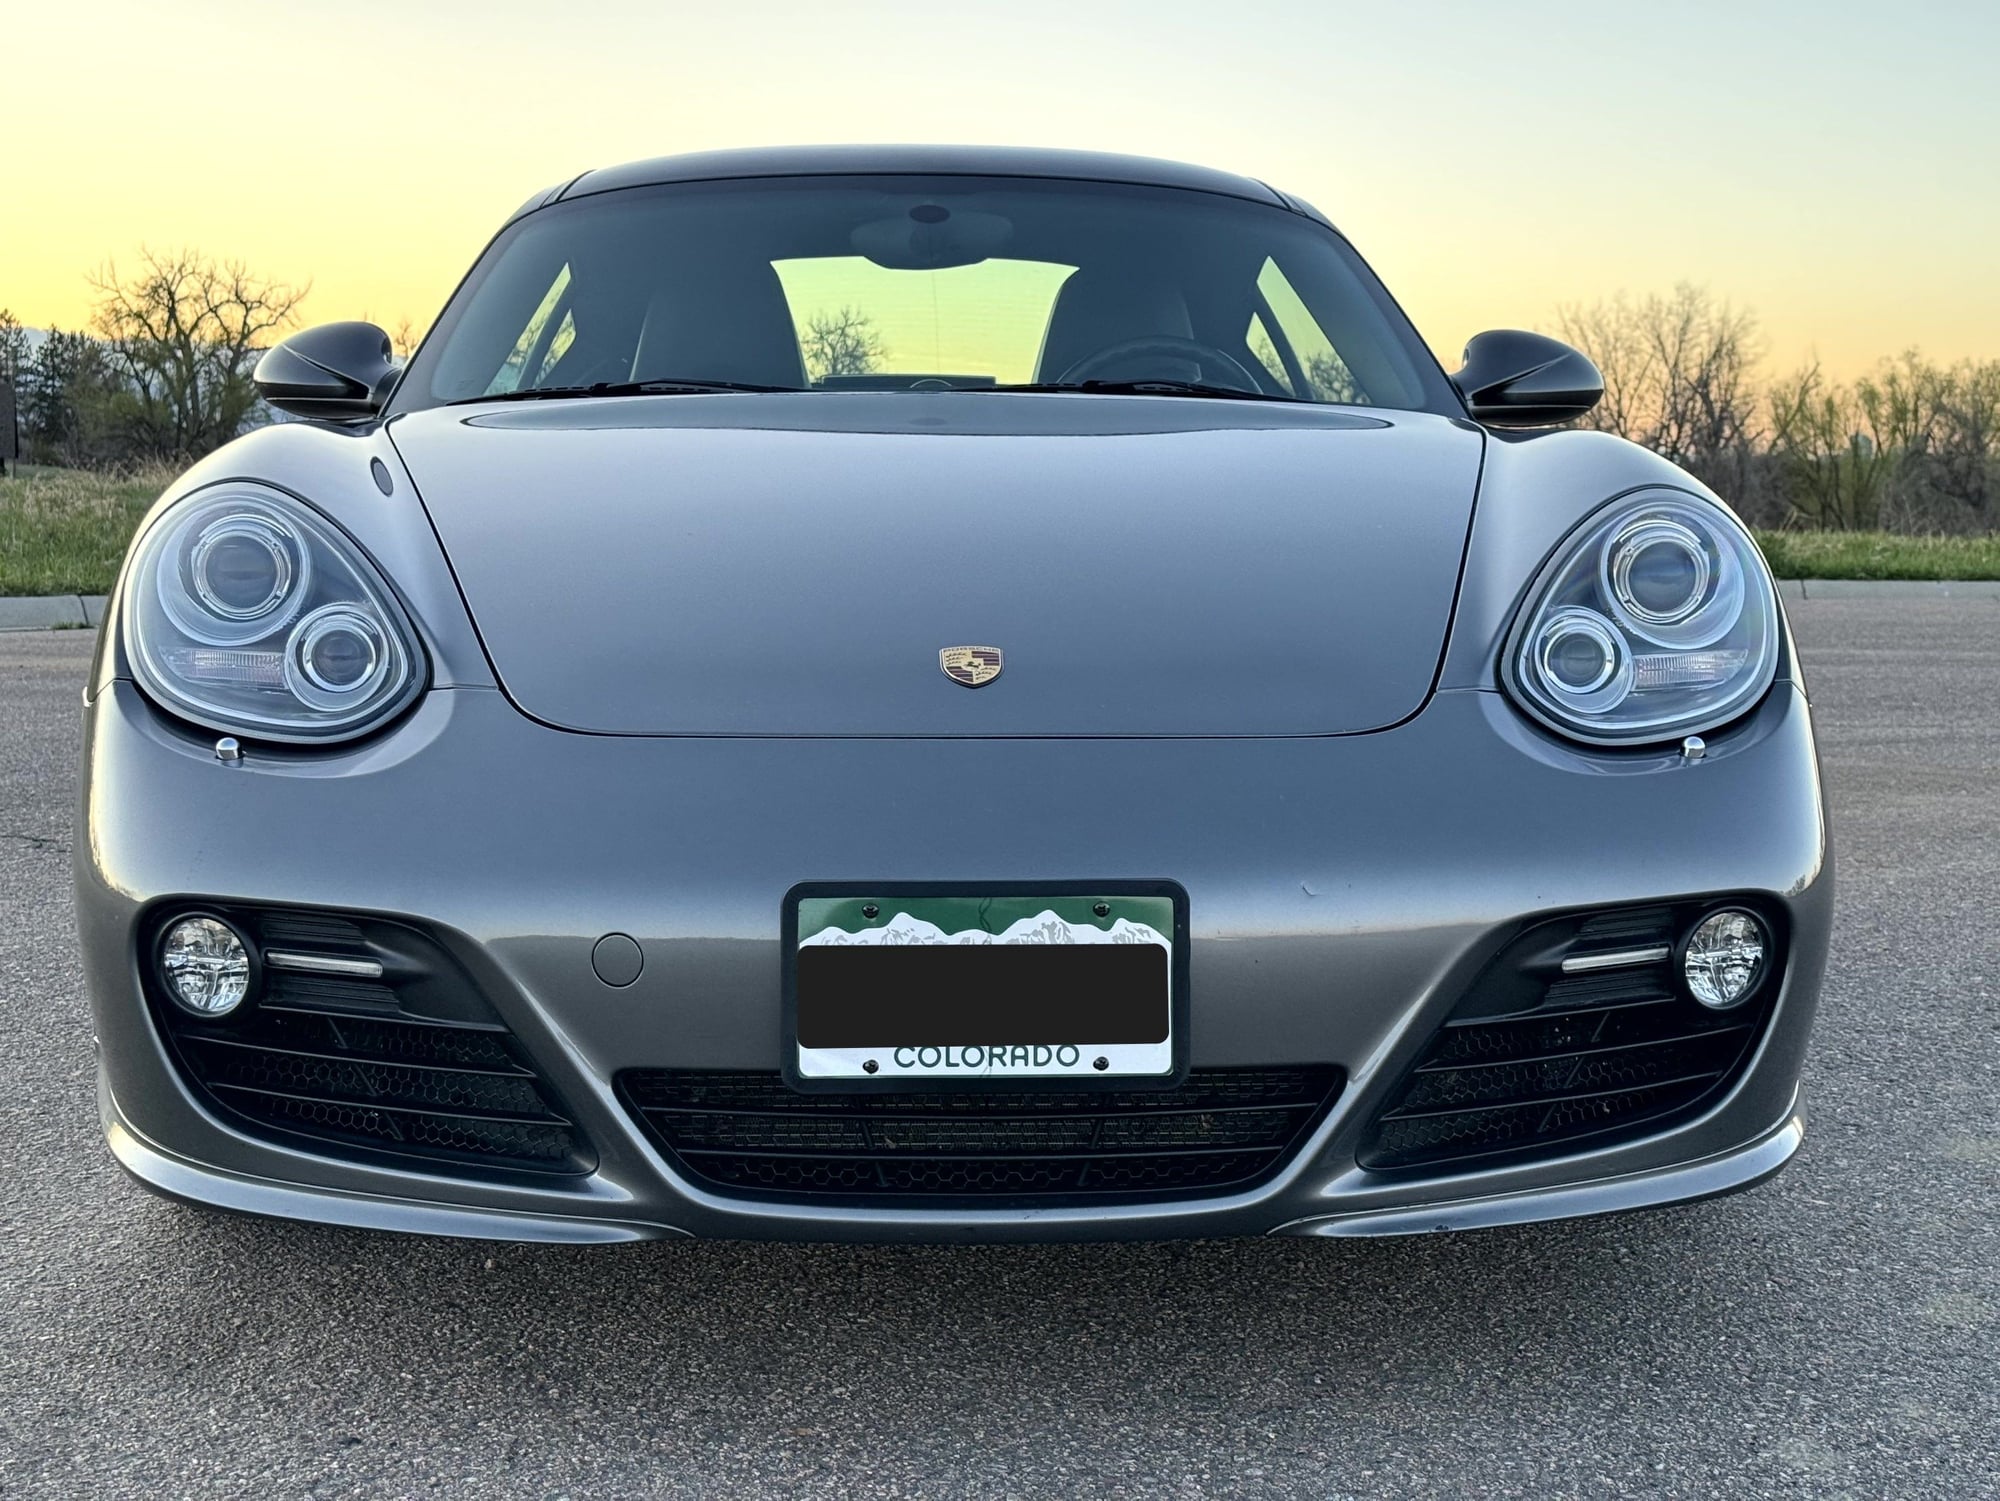 2009 Porsche Cayman - 2009 Porsche Cayman S (987.2) 6 Speed Manual - Used - VIN WP0AB29819U780700 - 71,600 Miles - 6 cyl - 2WD - Manual - Coupe - Gray - Denver, CO 80113, United States